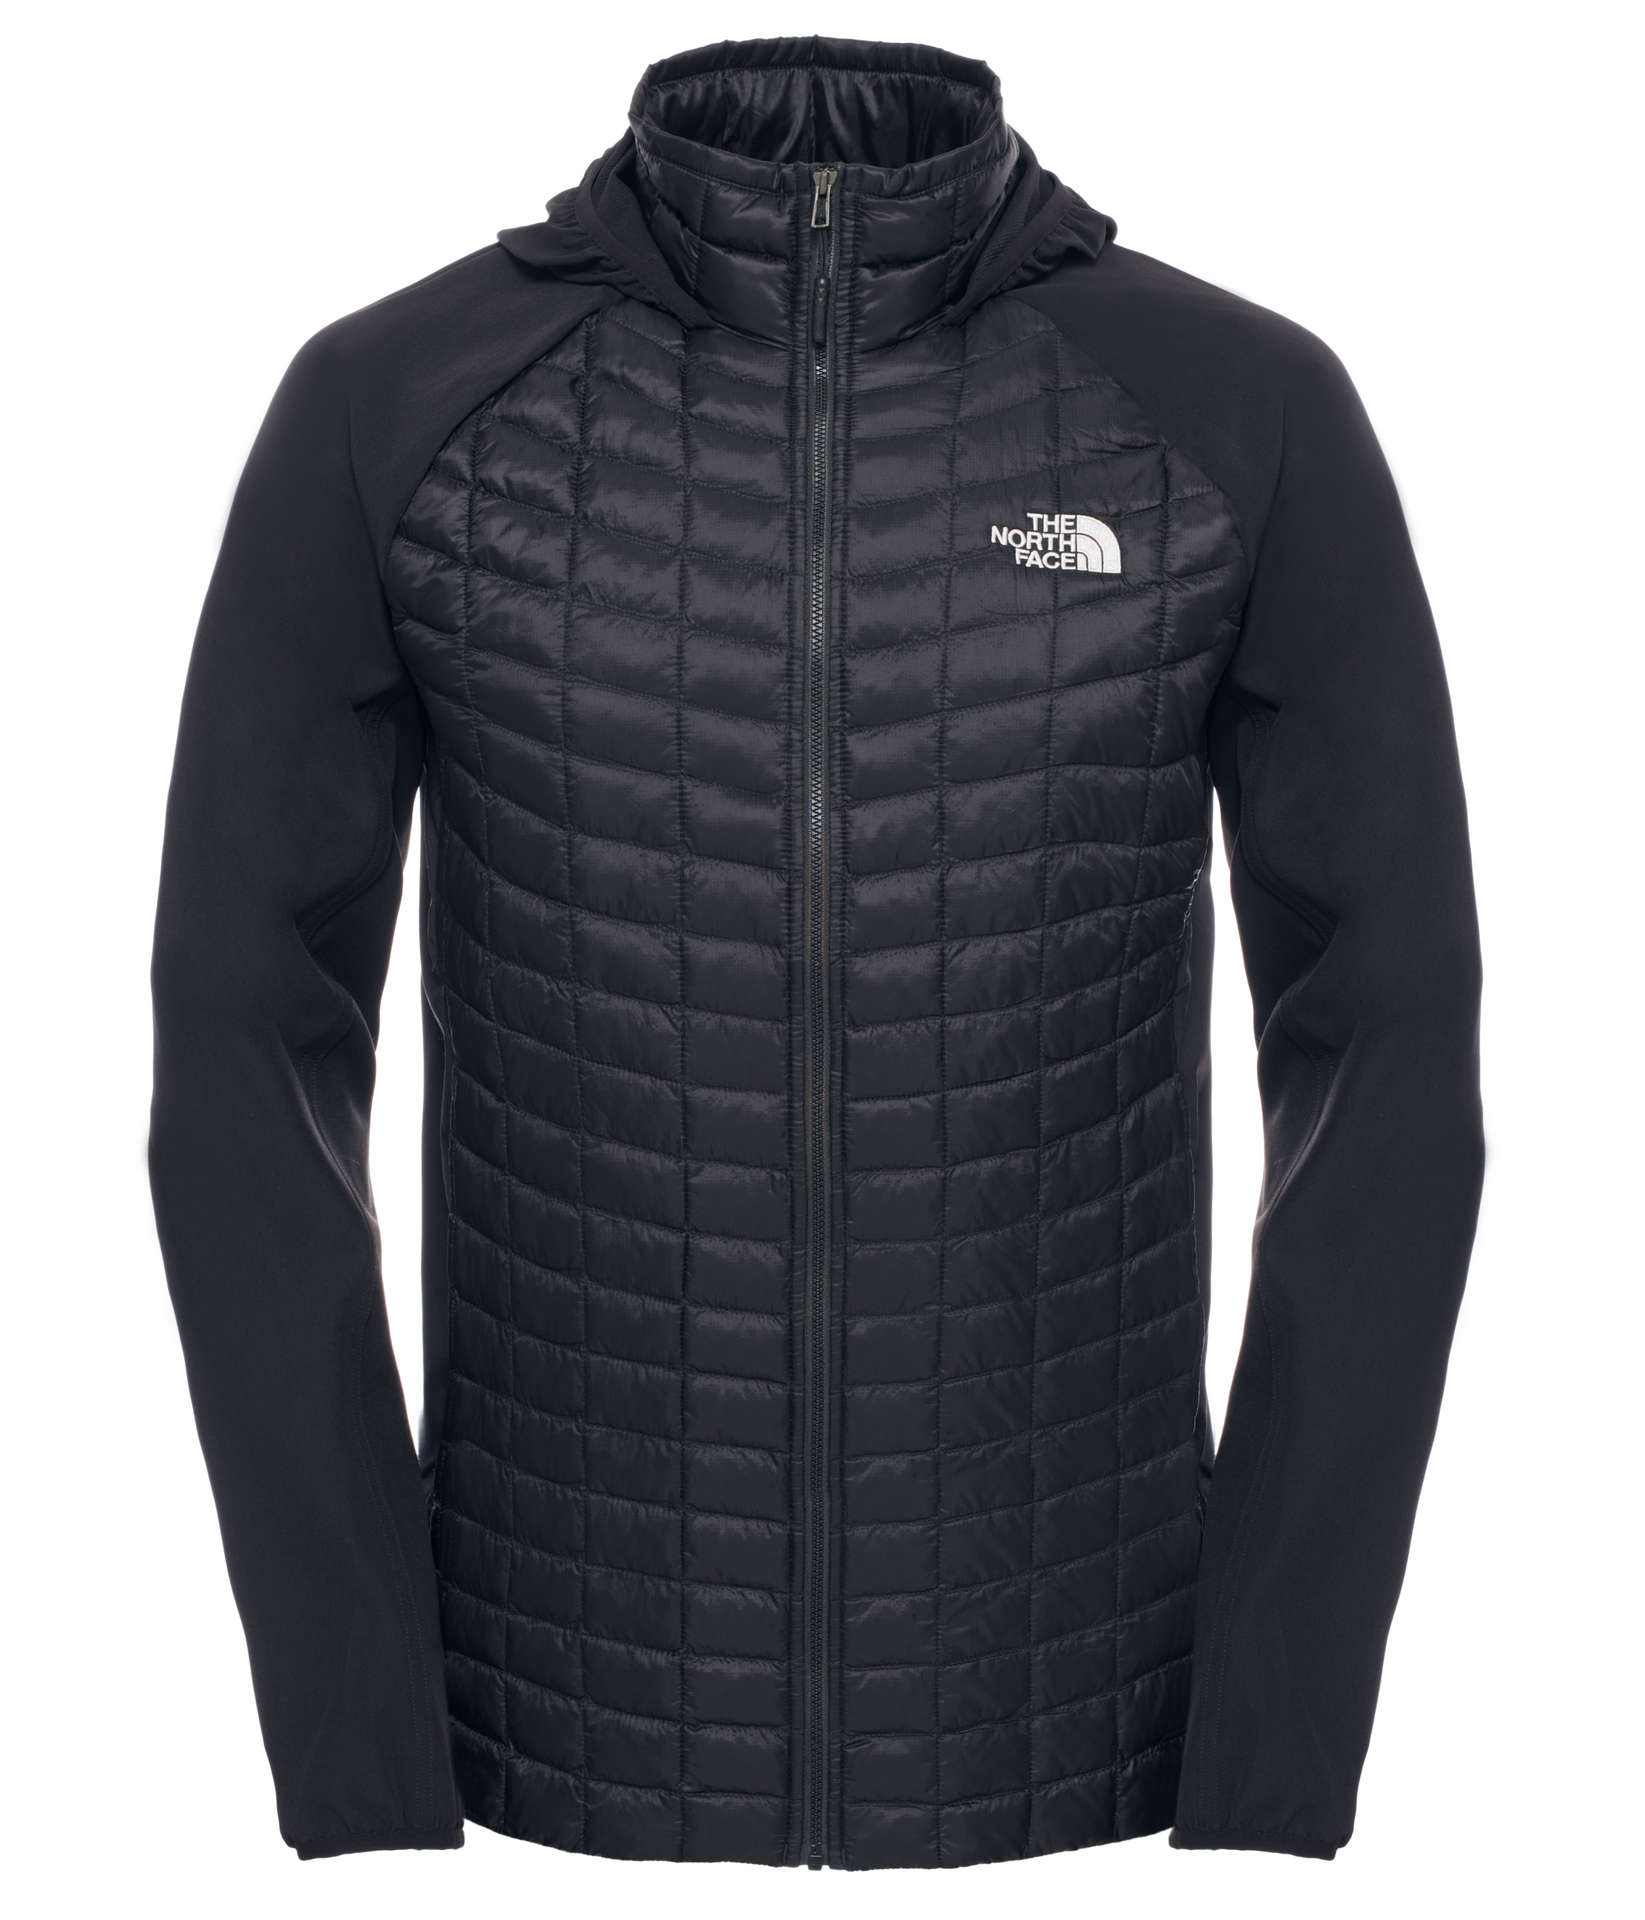 The North Face Thermoball Hybrid Hoodie Zwart Heren